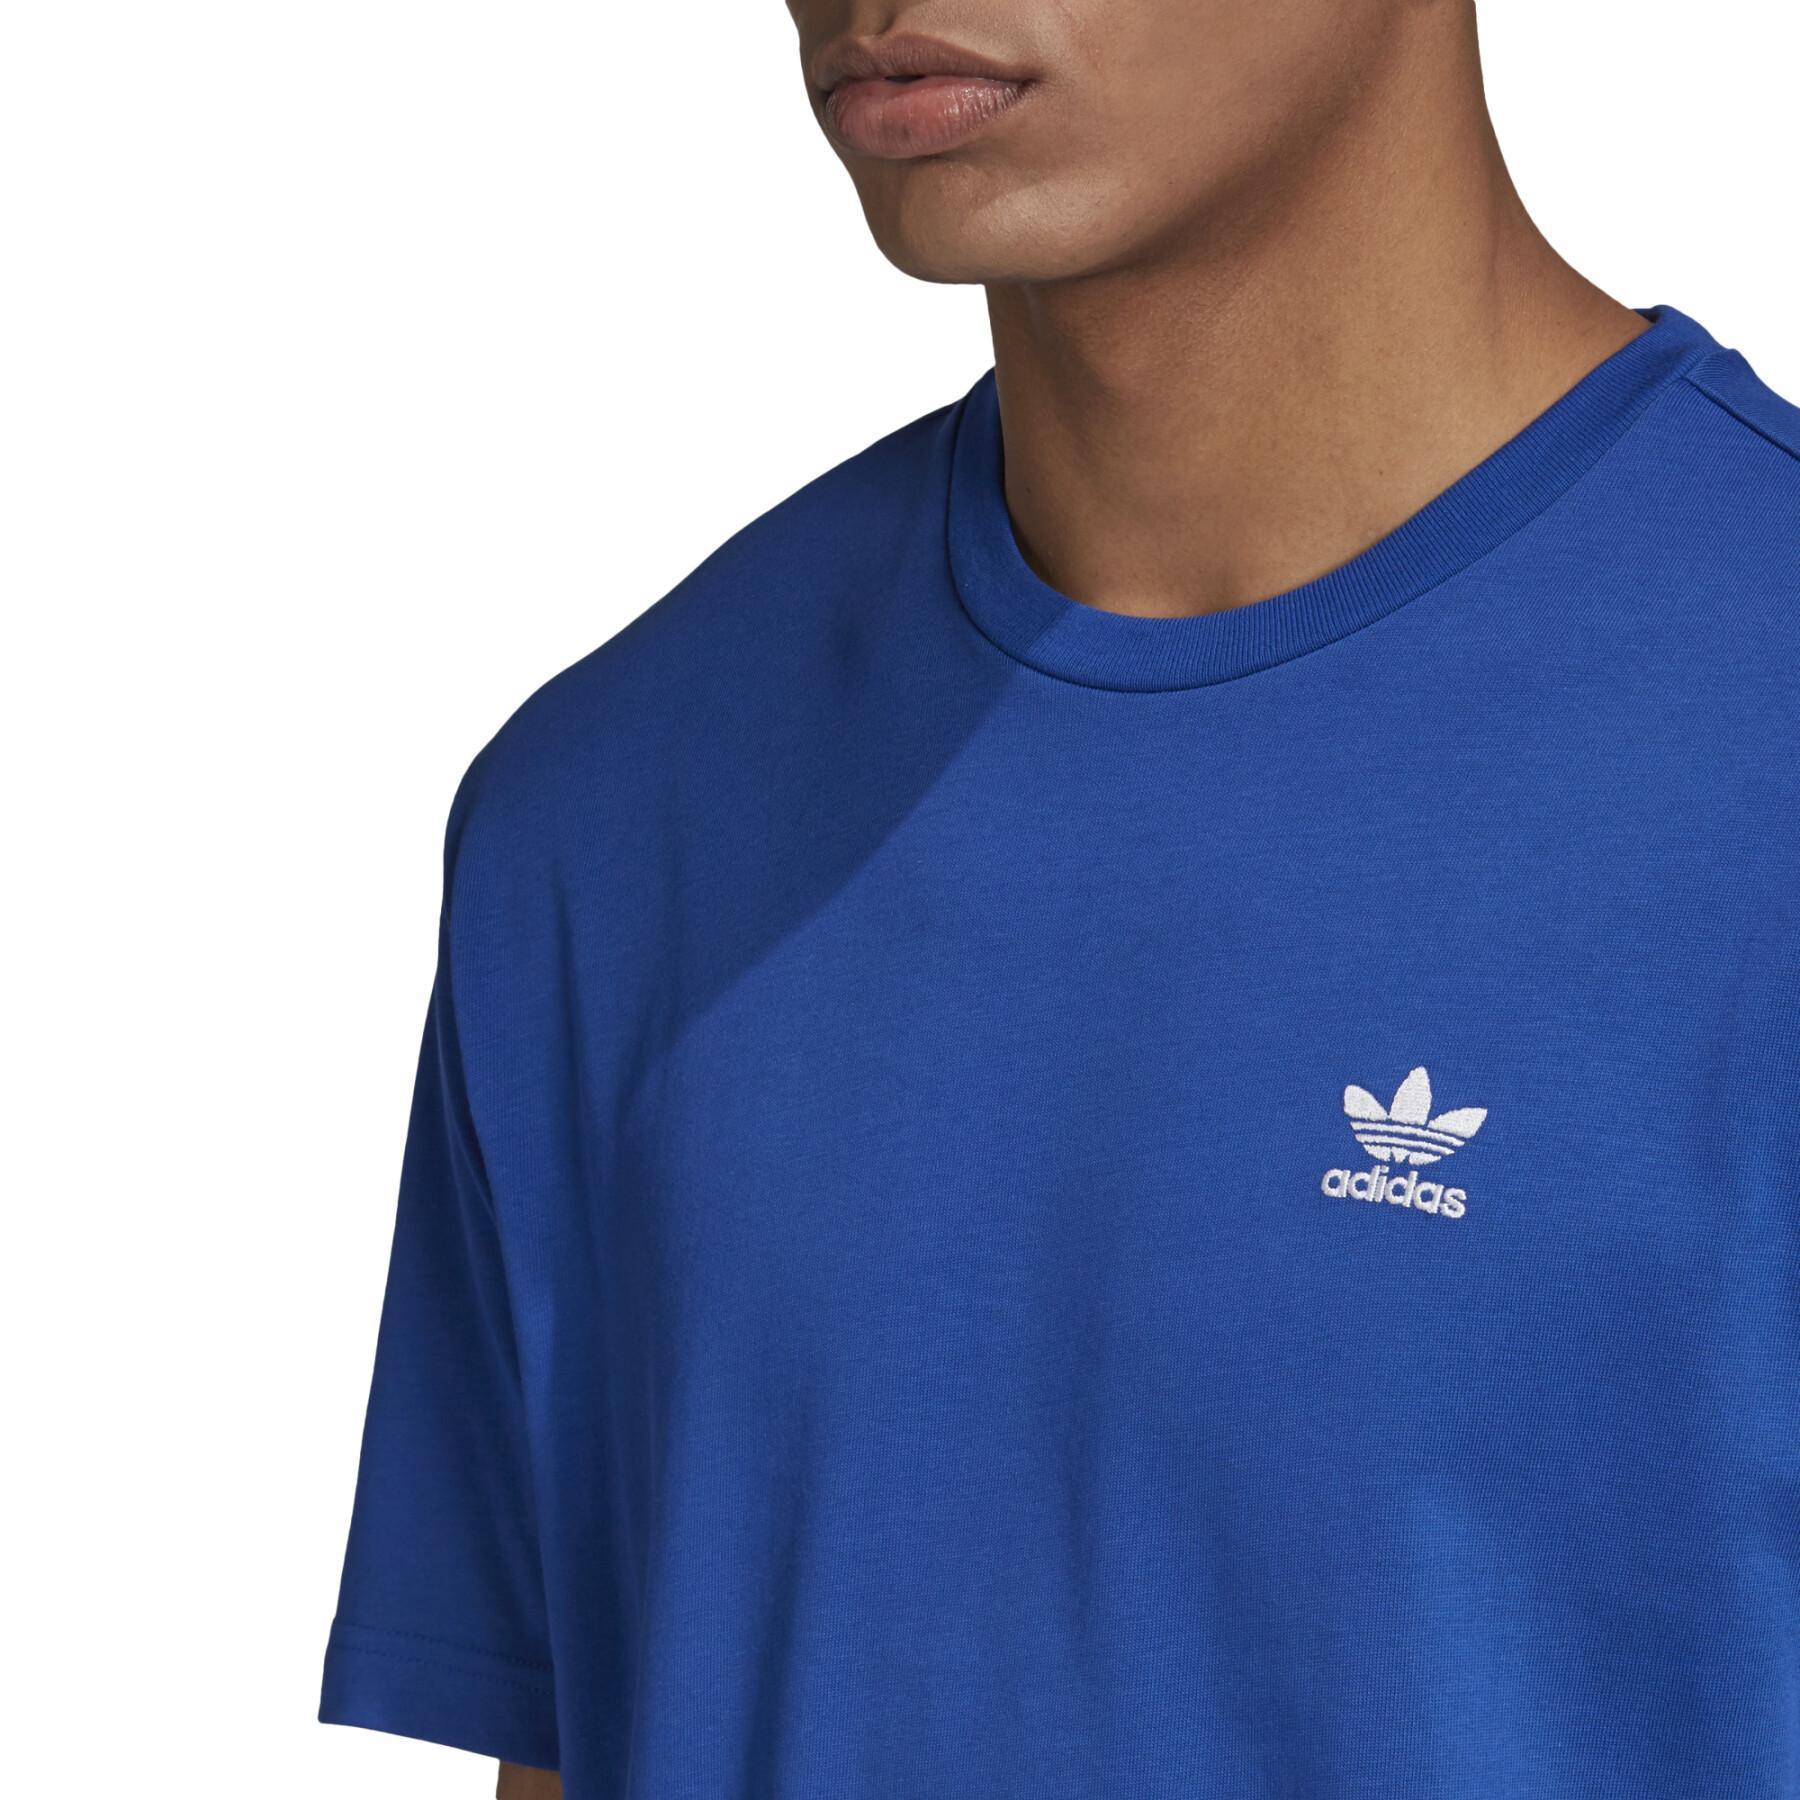 T-shirt adidas Originals Trefoil Boxywith Front and Back Print